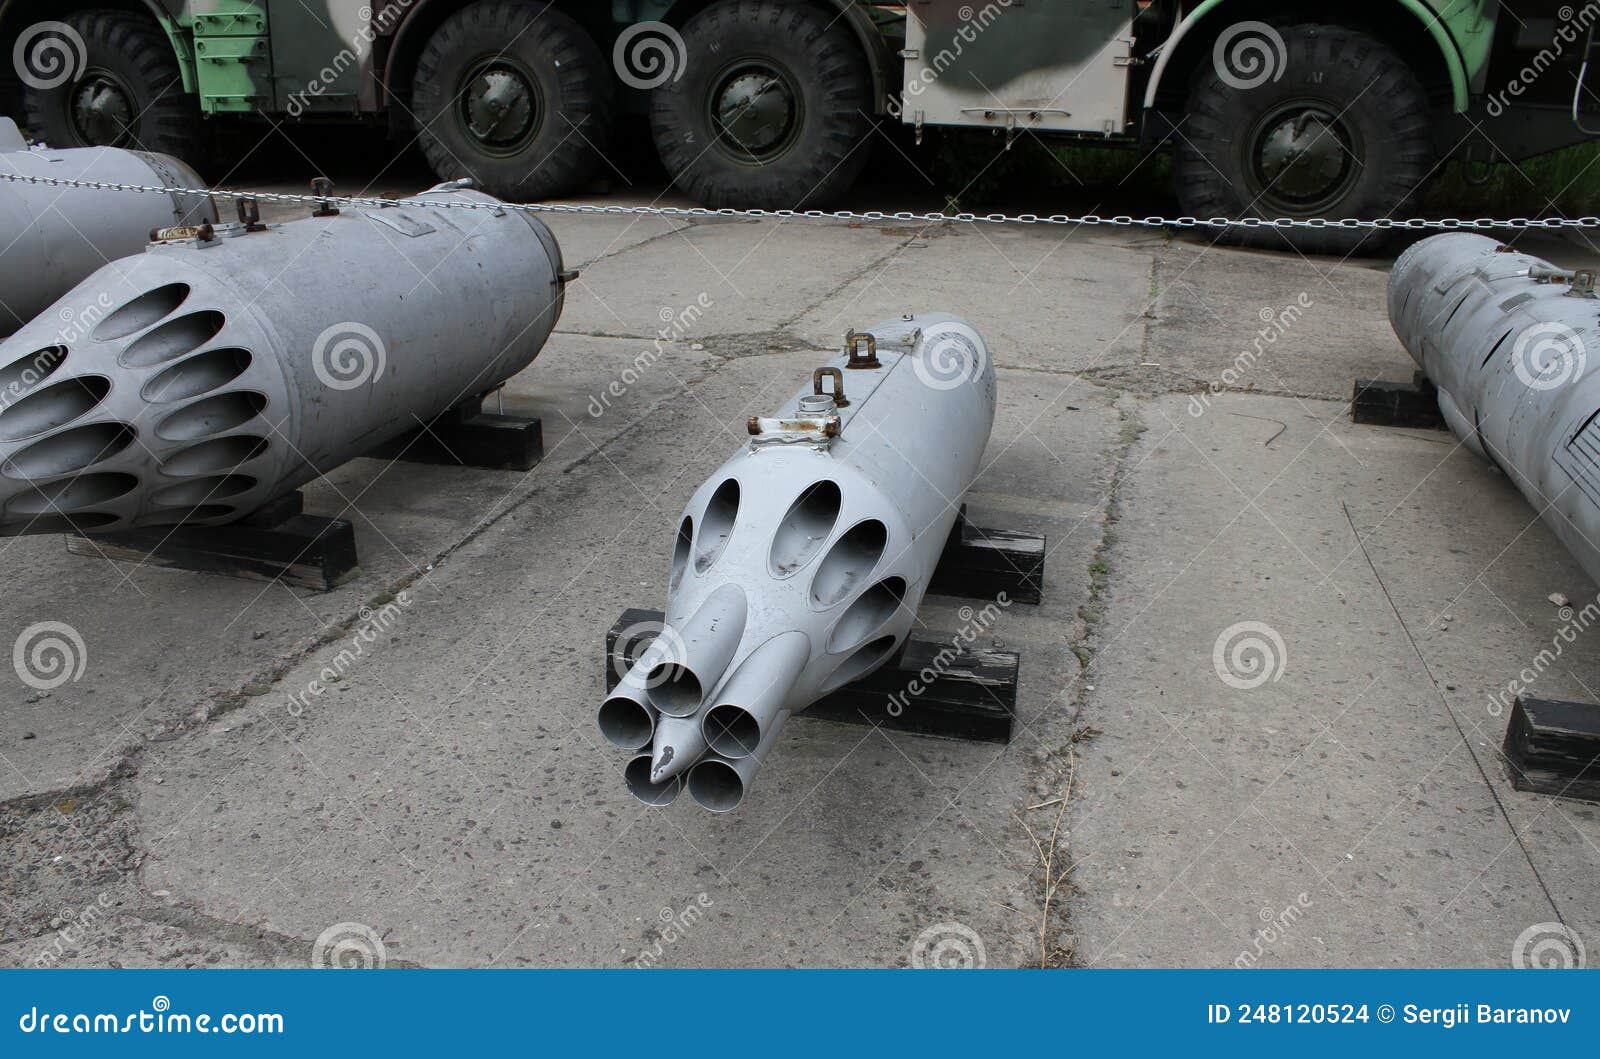 russian disarmed unguided rockets system on a ground at military base